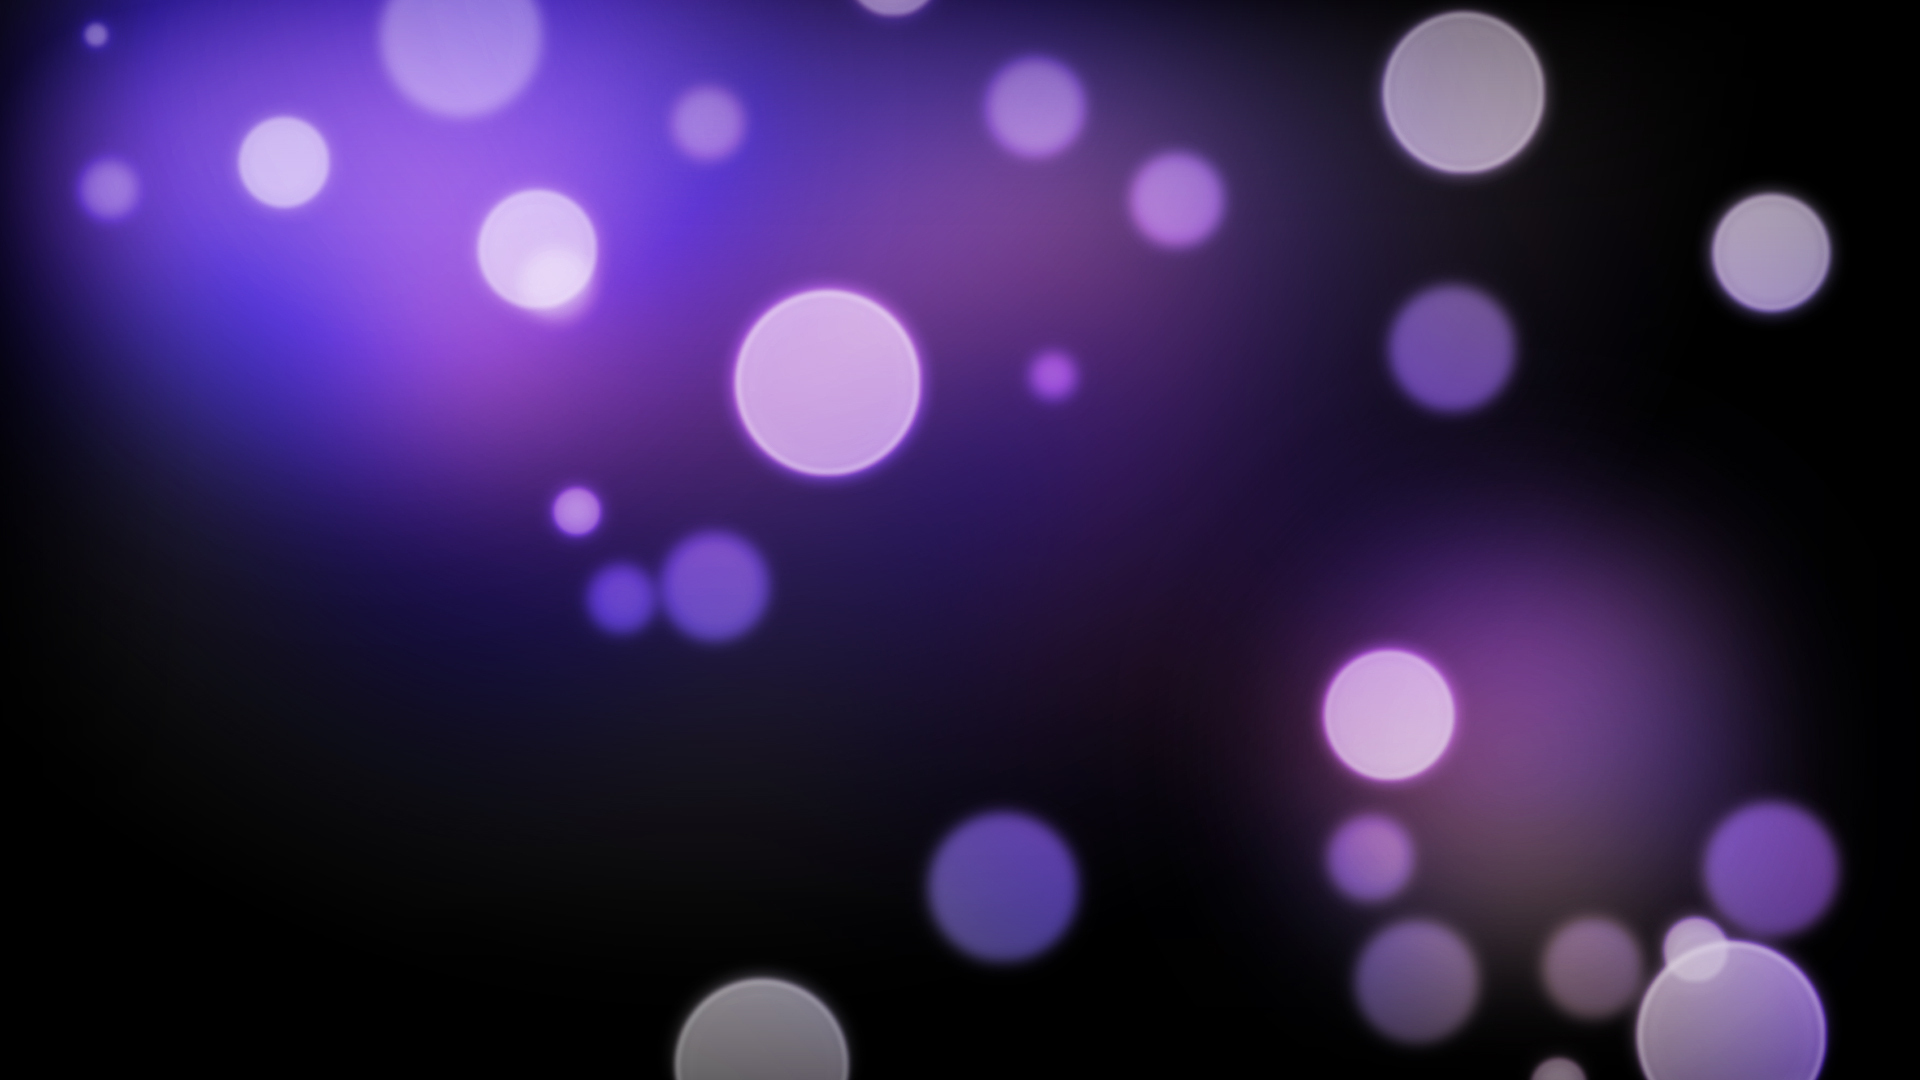 Purple Lights Wallpaper Cute Share This On